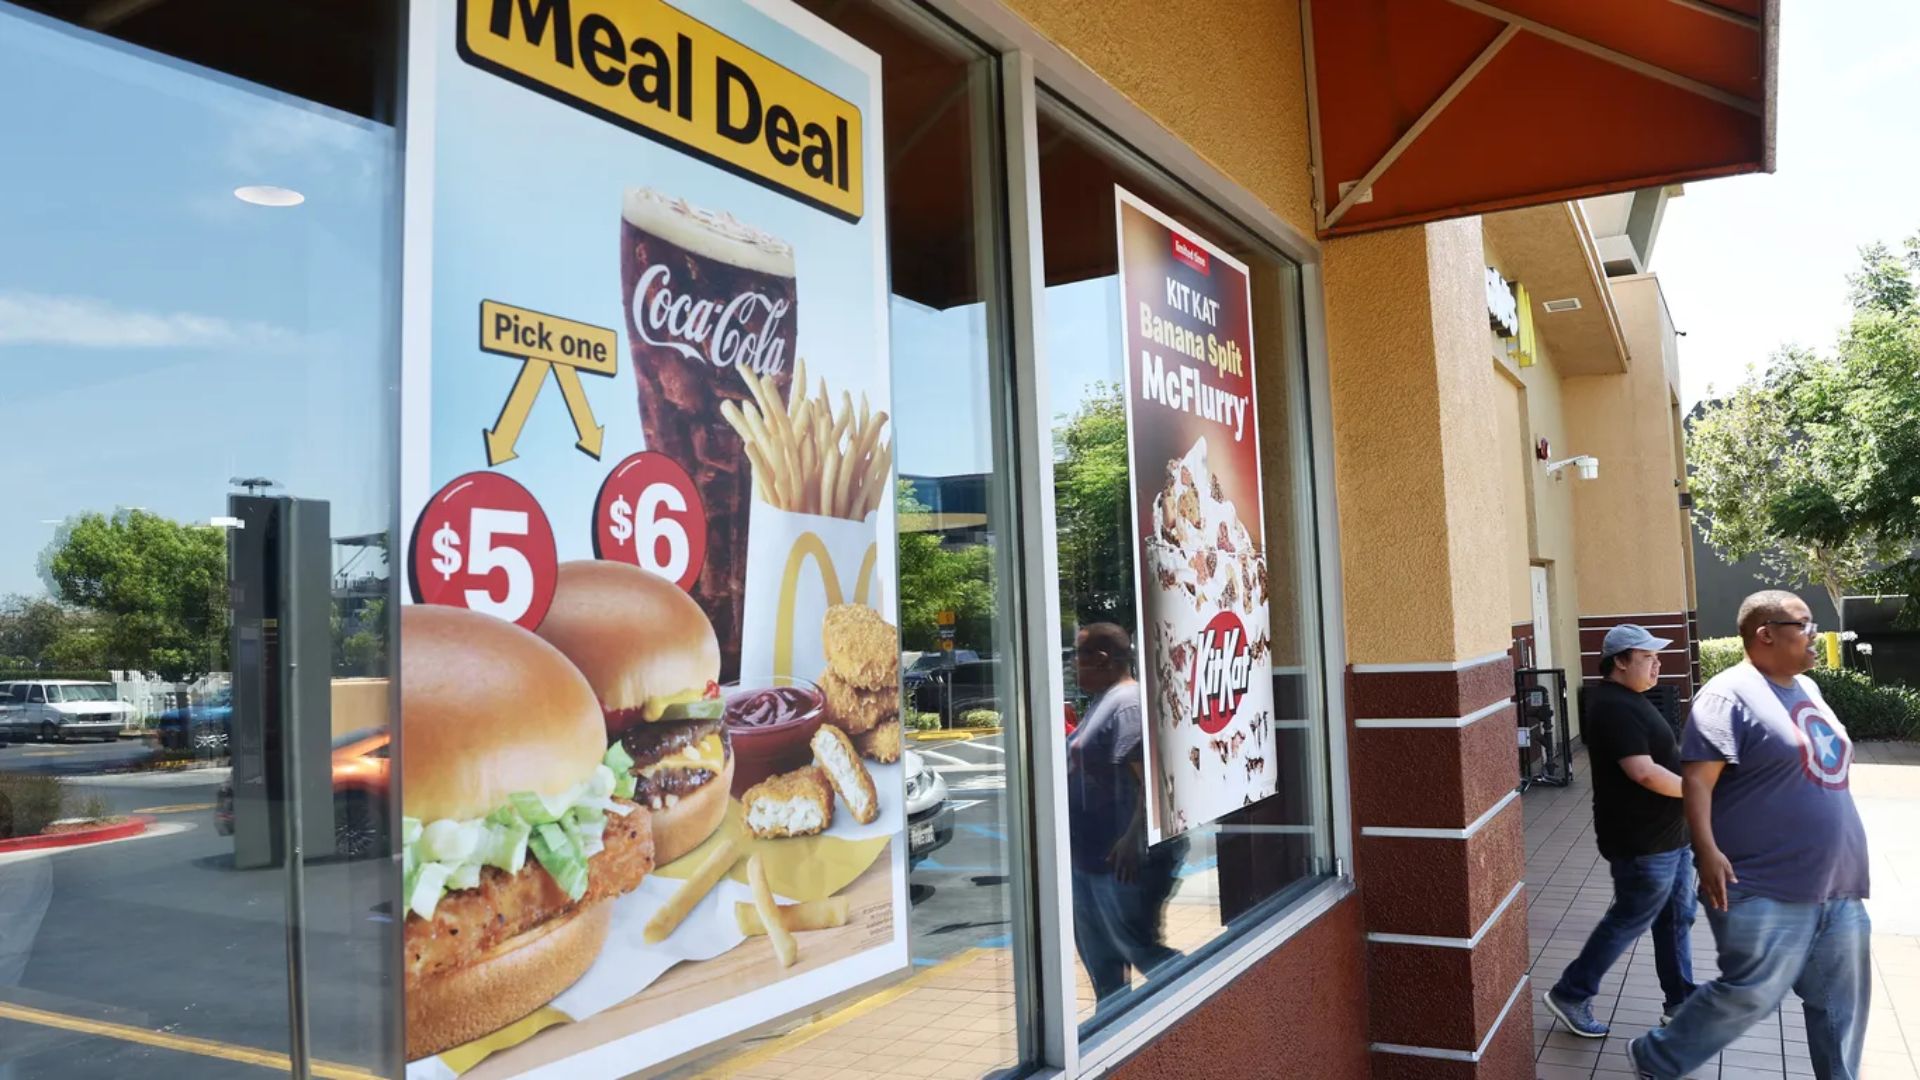 McDonald's extends $5 meal deal in summer of value push